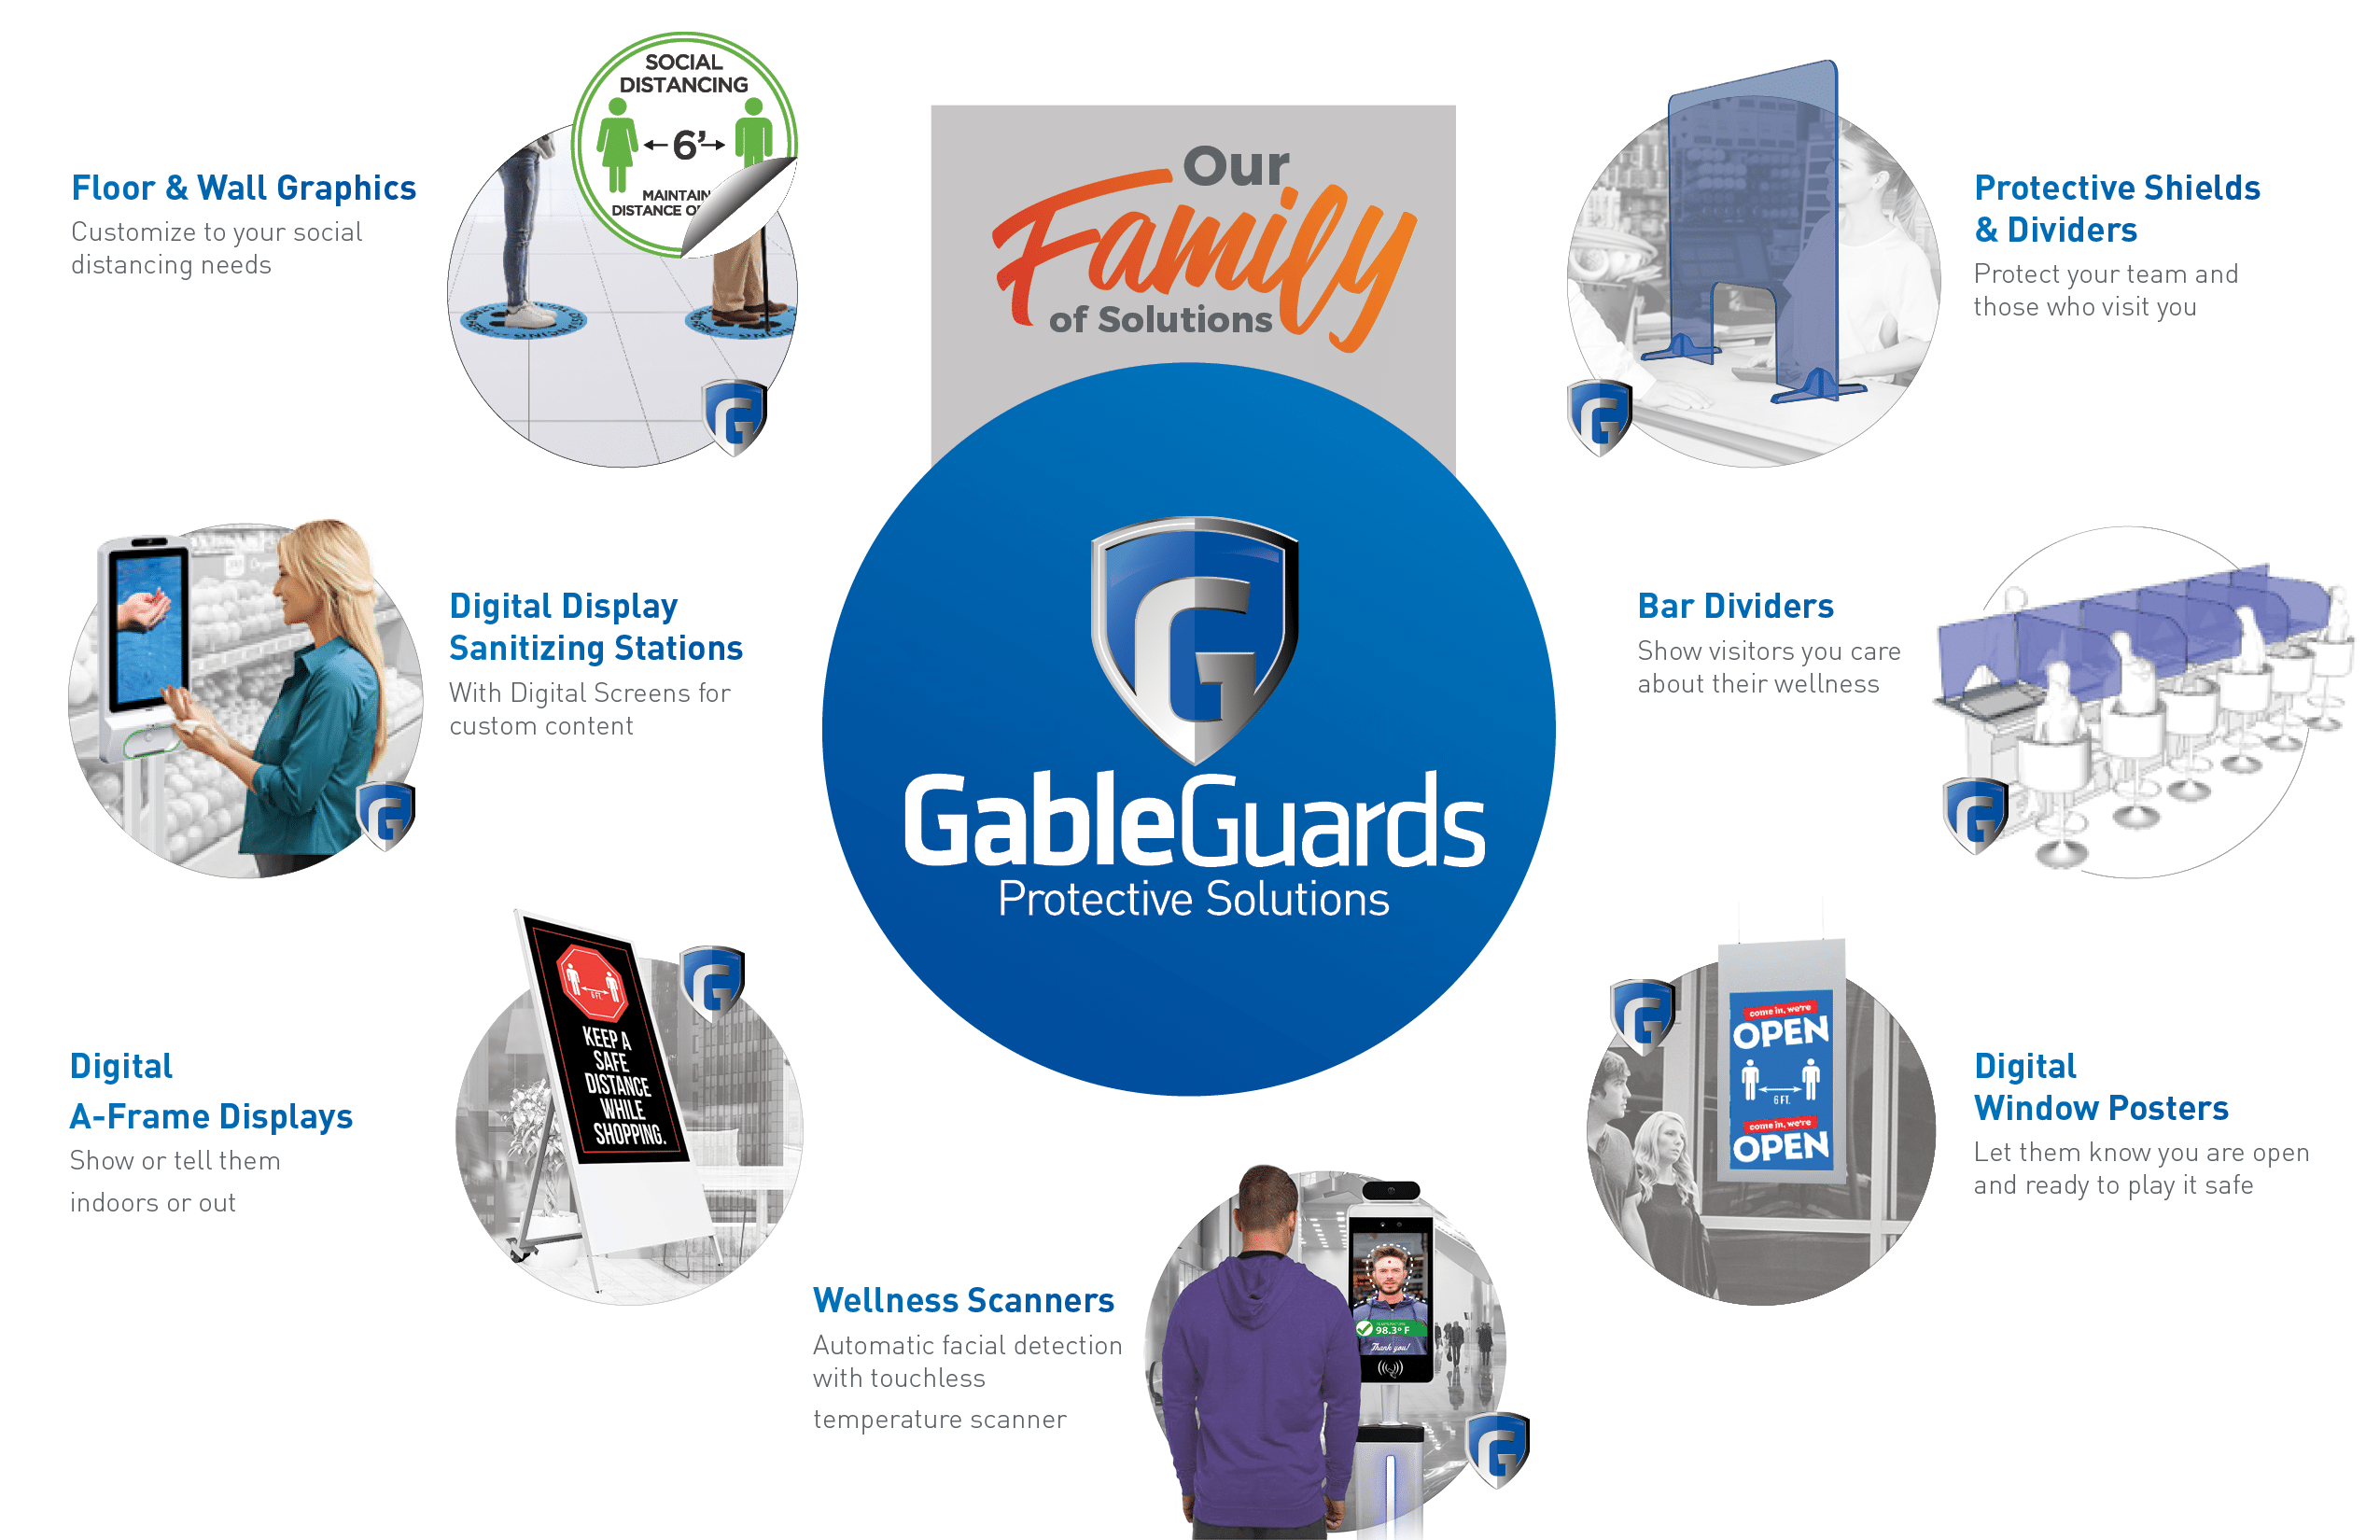 gableguards, ppe, protective solutions, safety, health safety, public health, corona shield, corona virus protection, covid19 safety